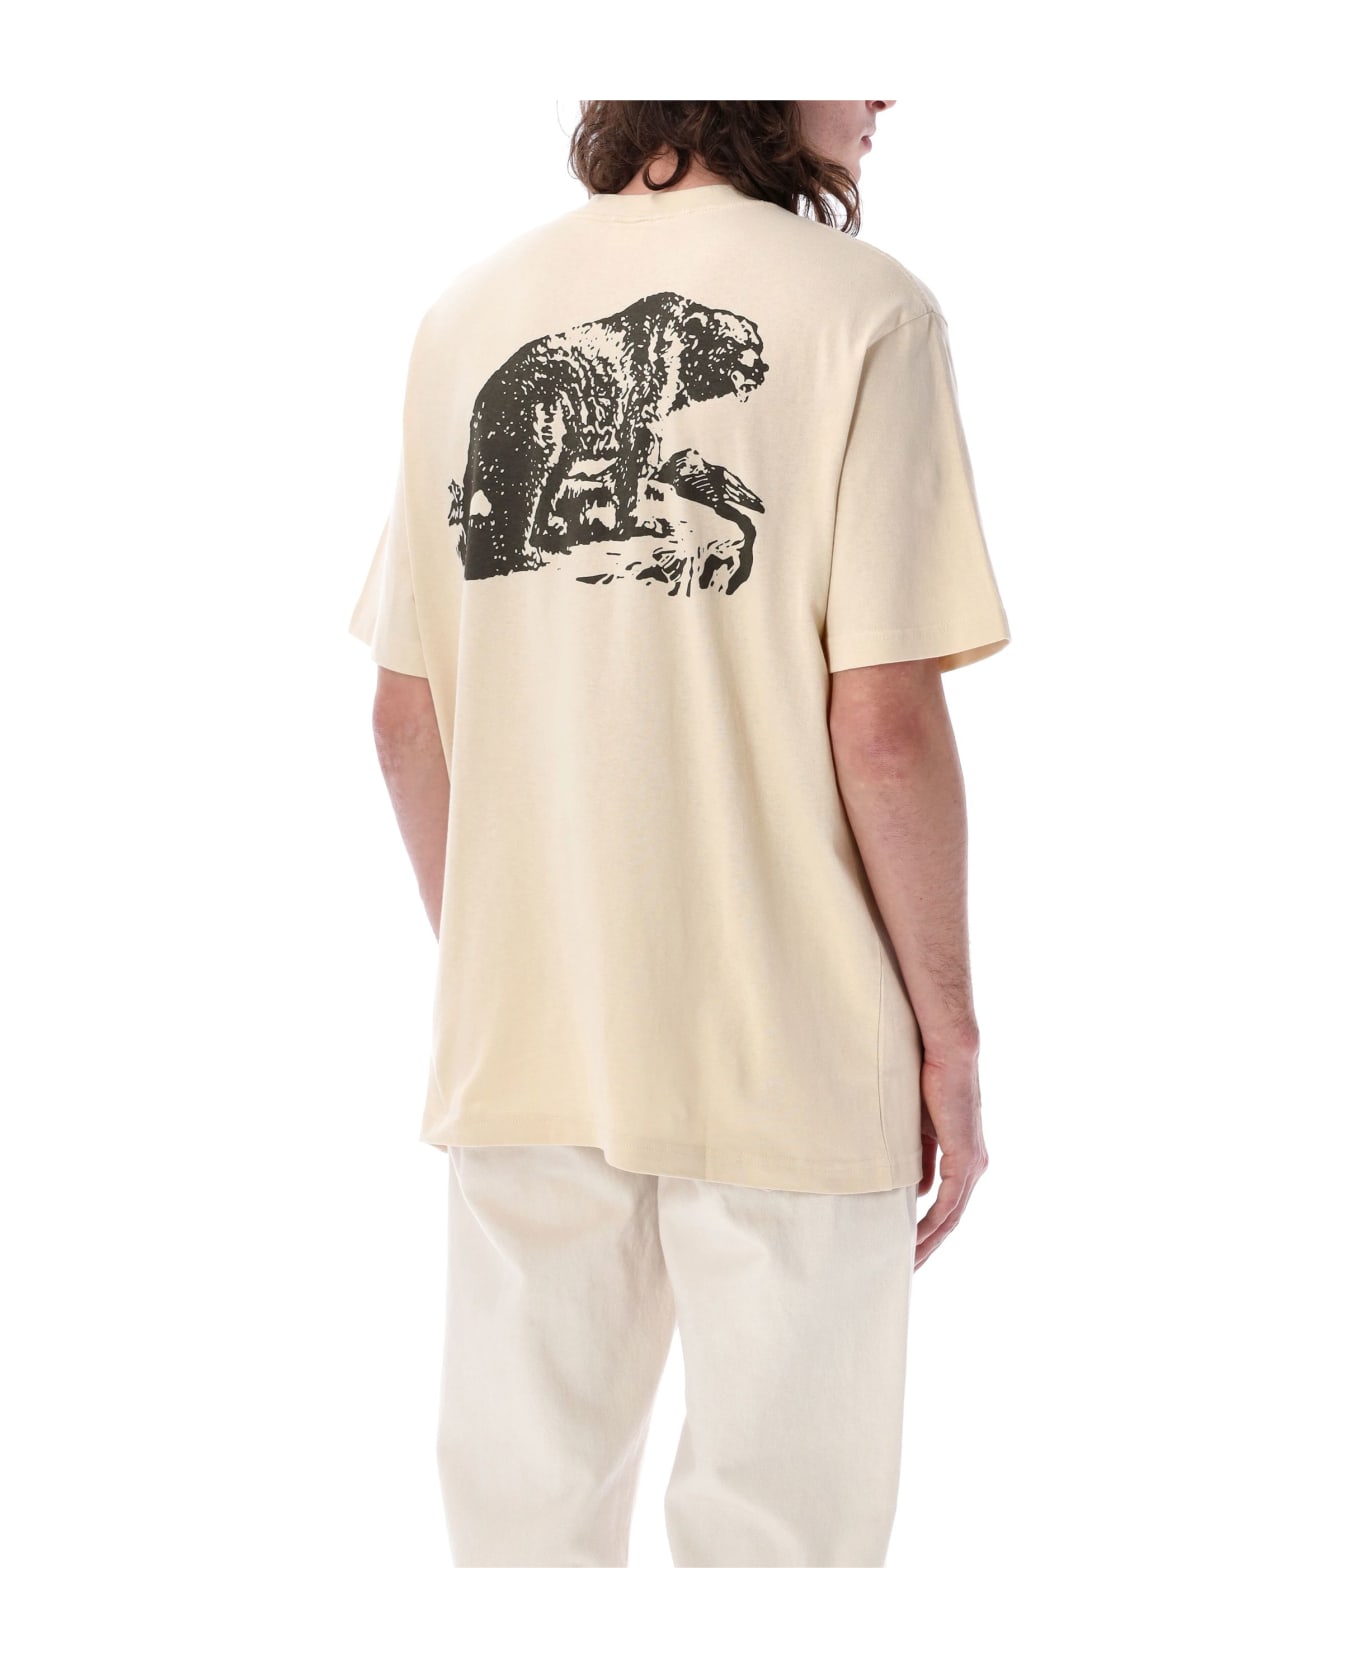 Filson Frontier Graphic T-shirt - NATURAL